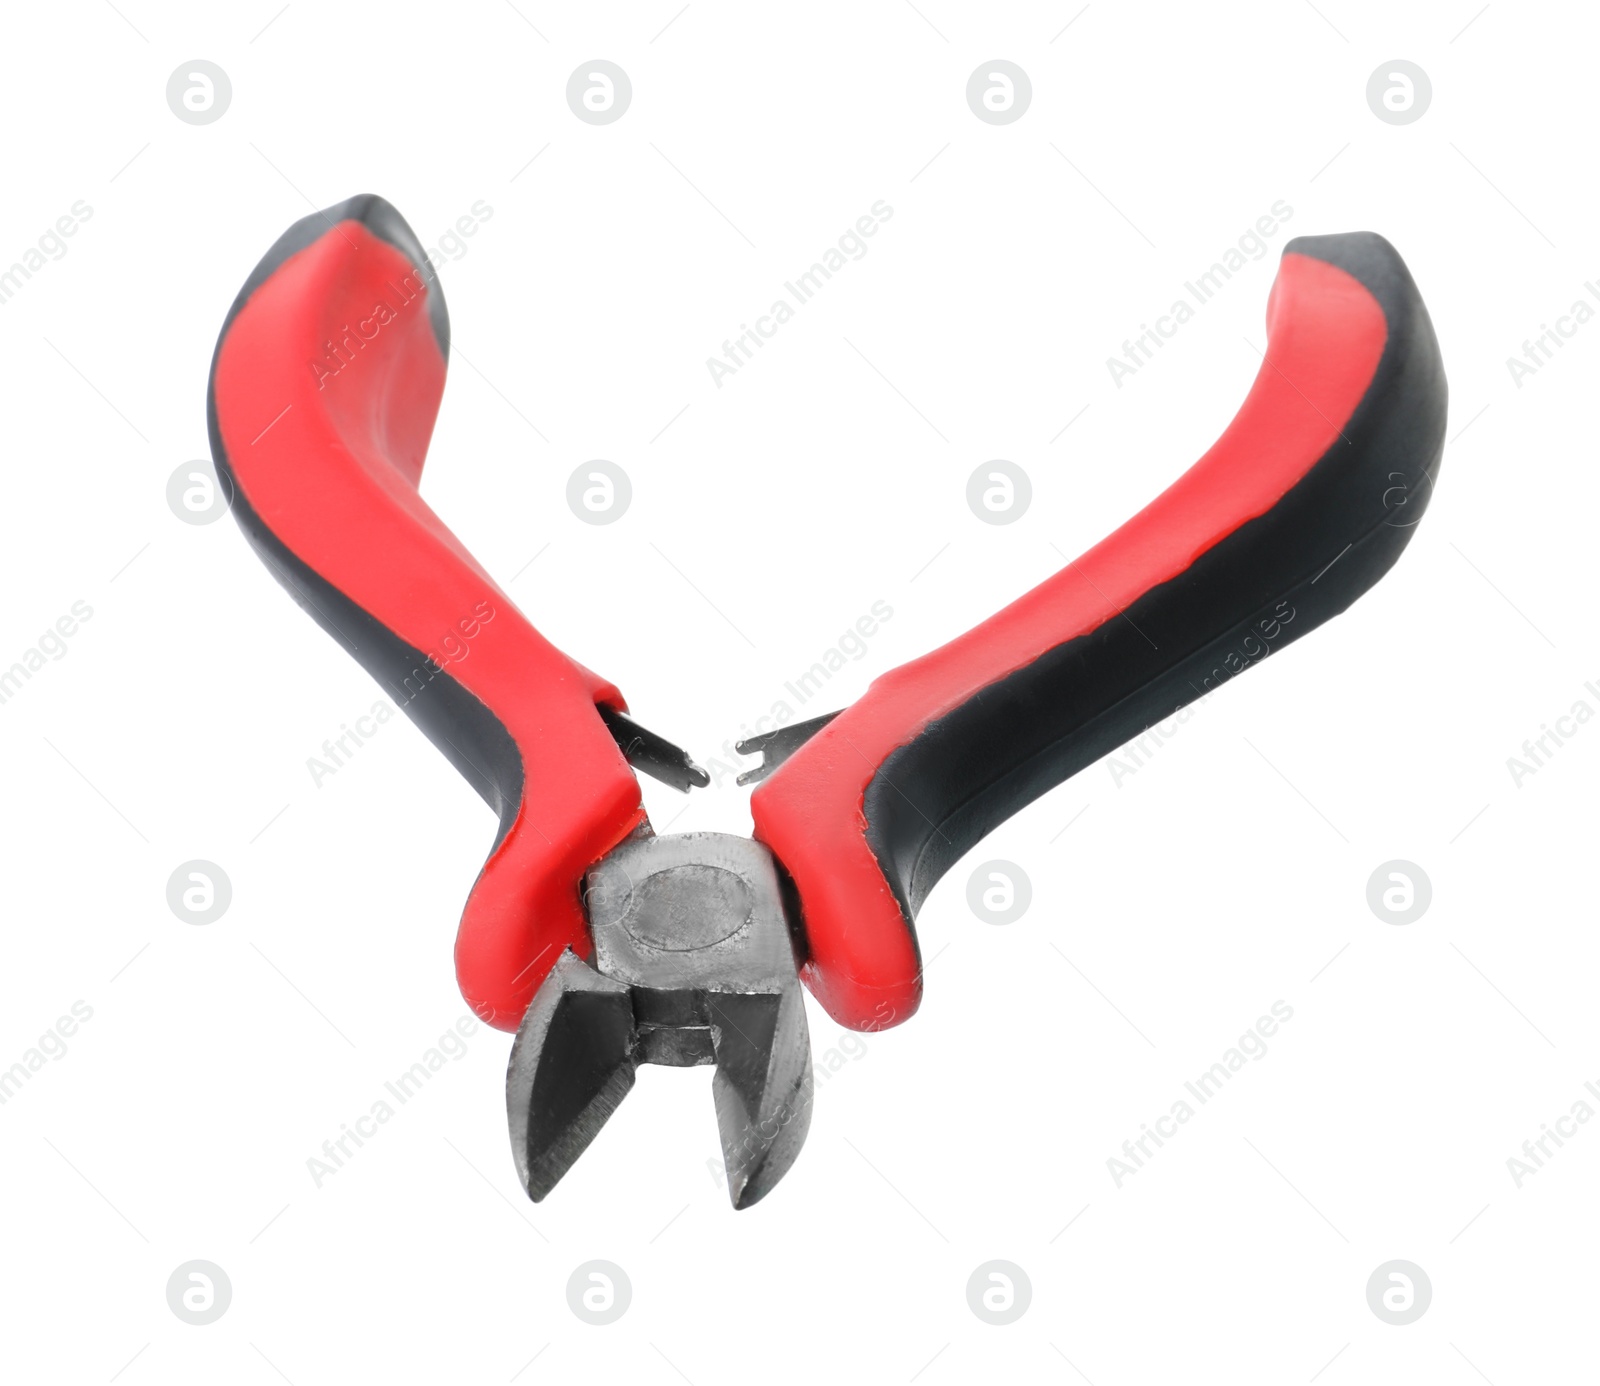 Photo of New side cutting pliers isolated on white